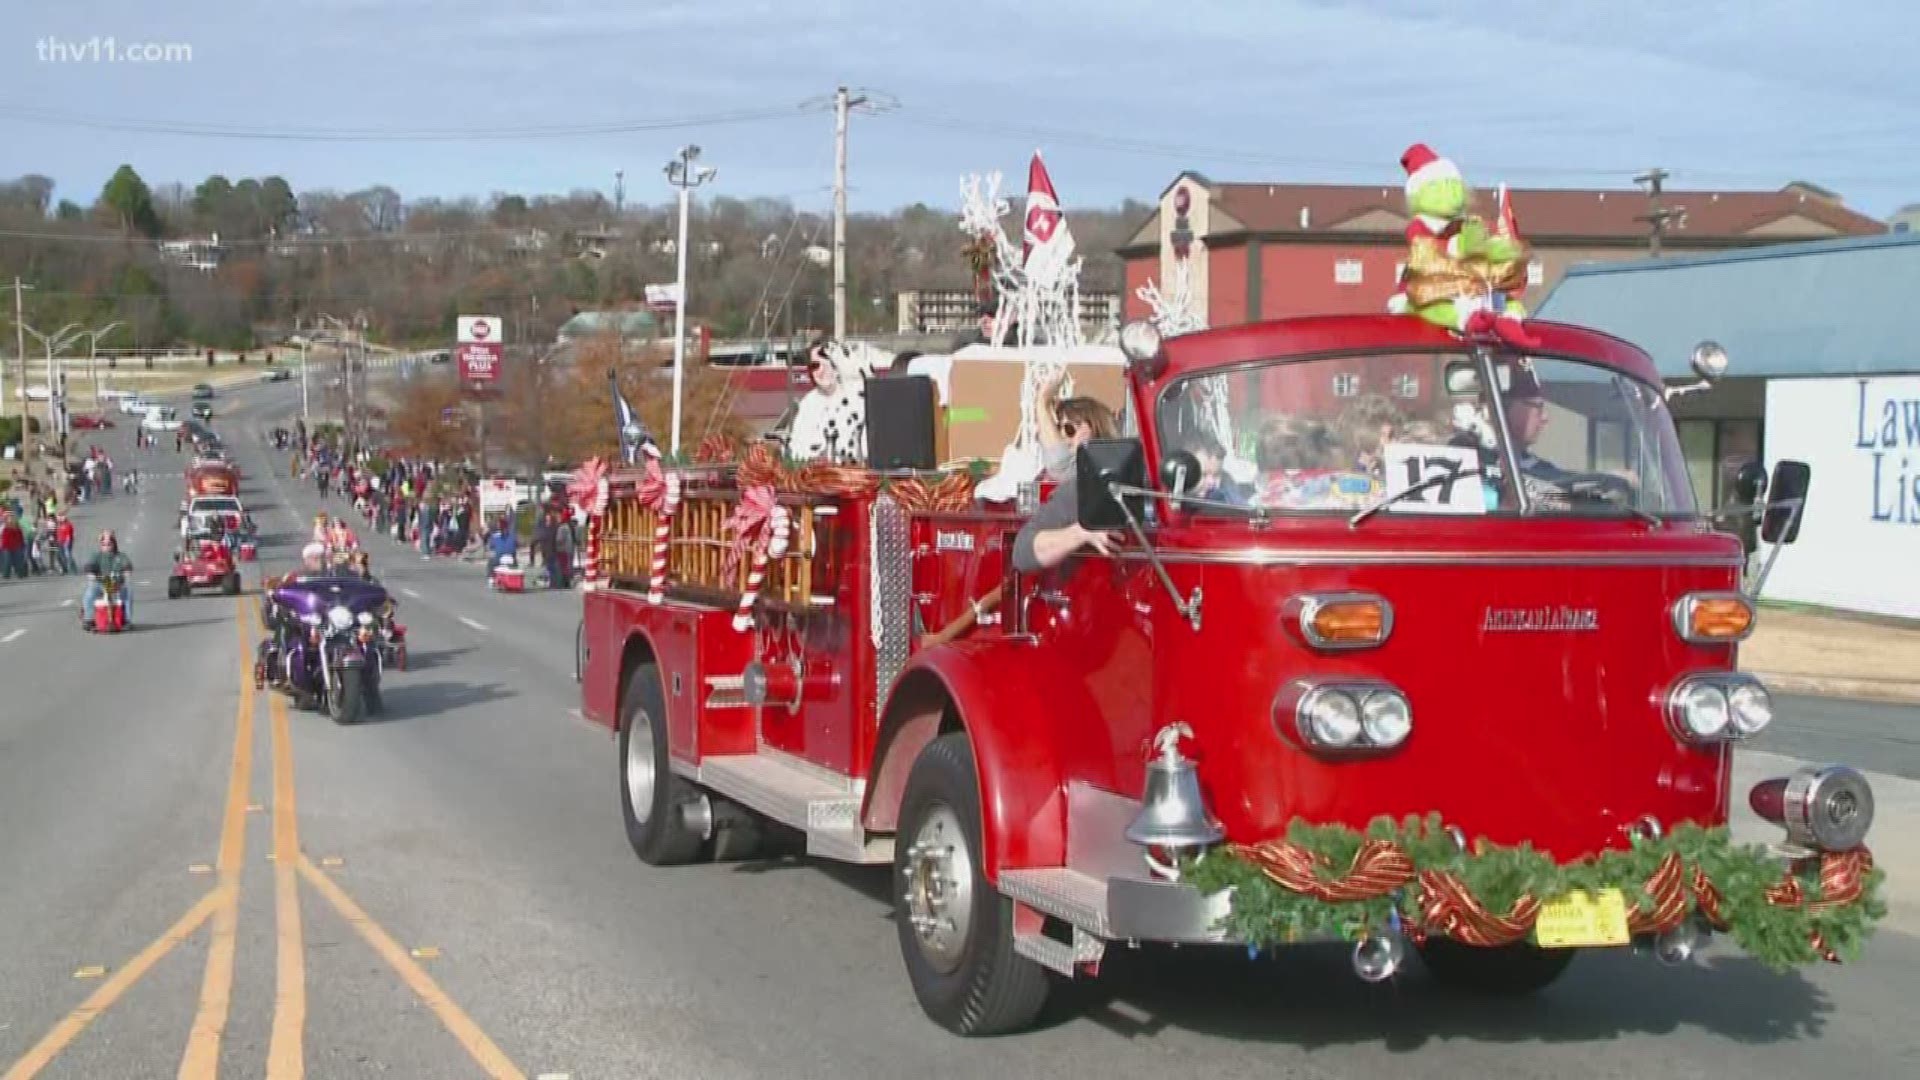 The city of North Little Rock spread some holiday cheer today with its annual Christmas parade.